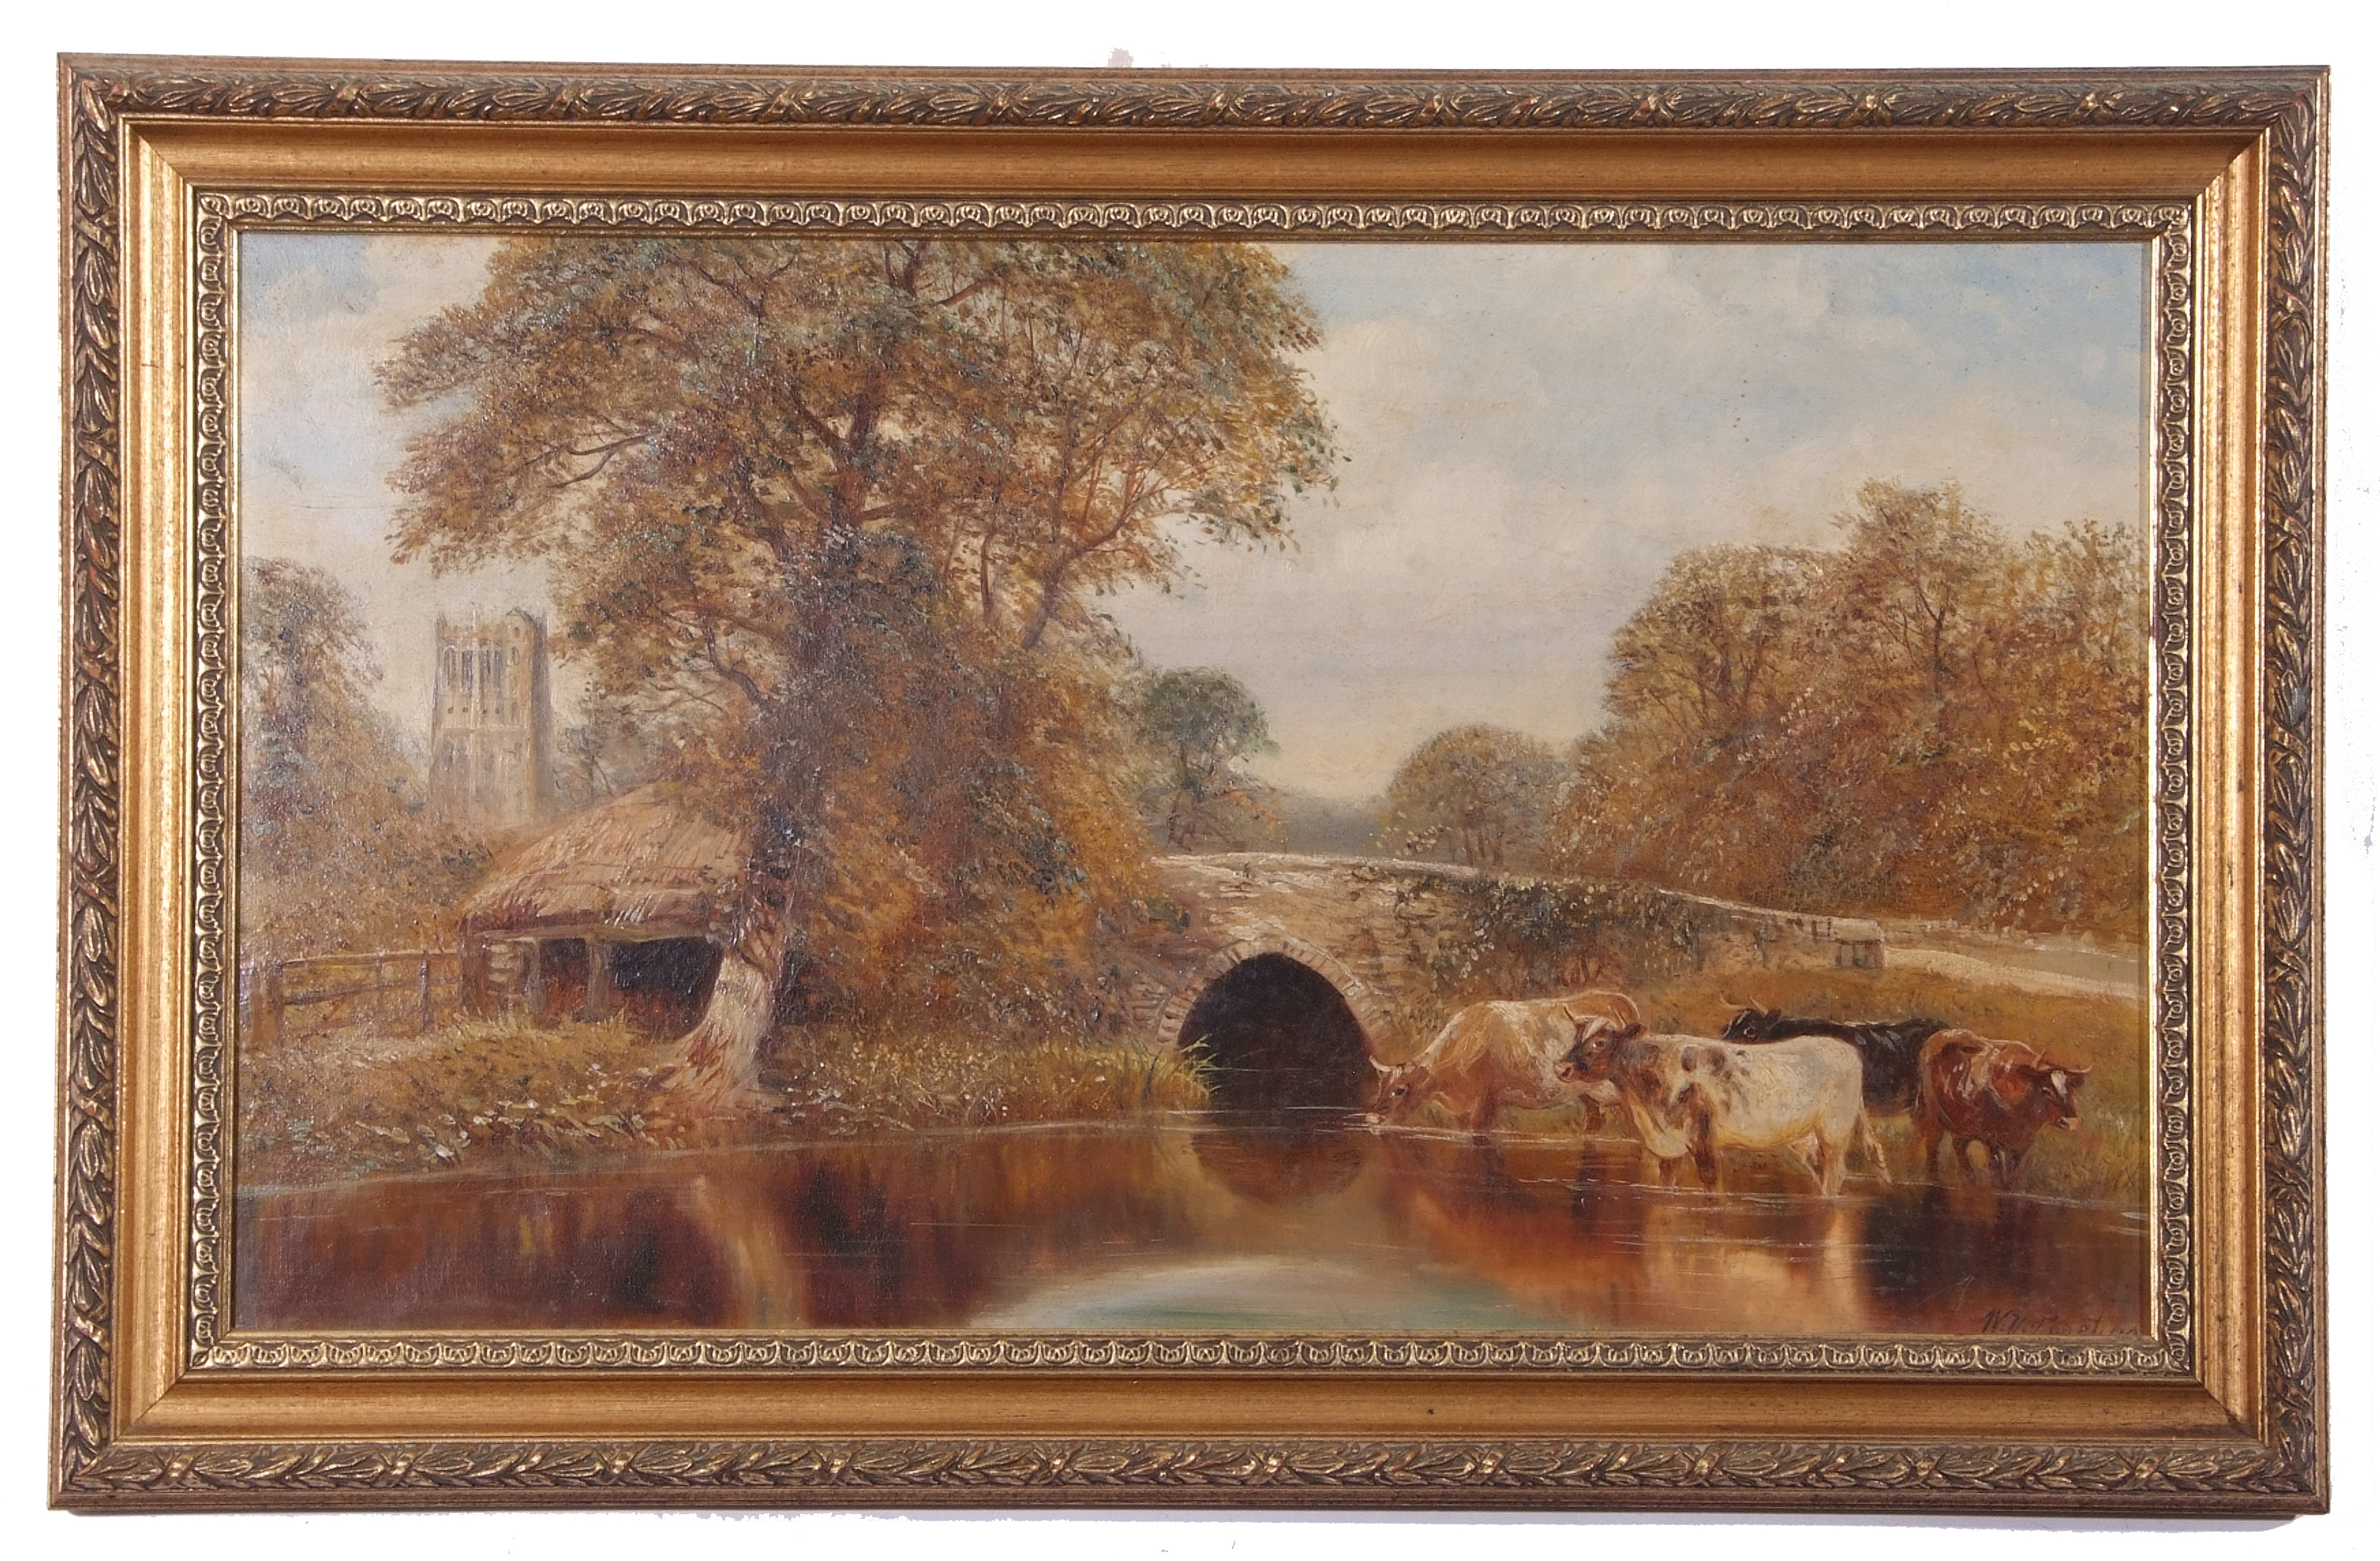 British 19th Century, A landscape with cattle overlooked by a stone bridge and parish church, oil